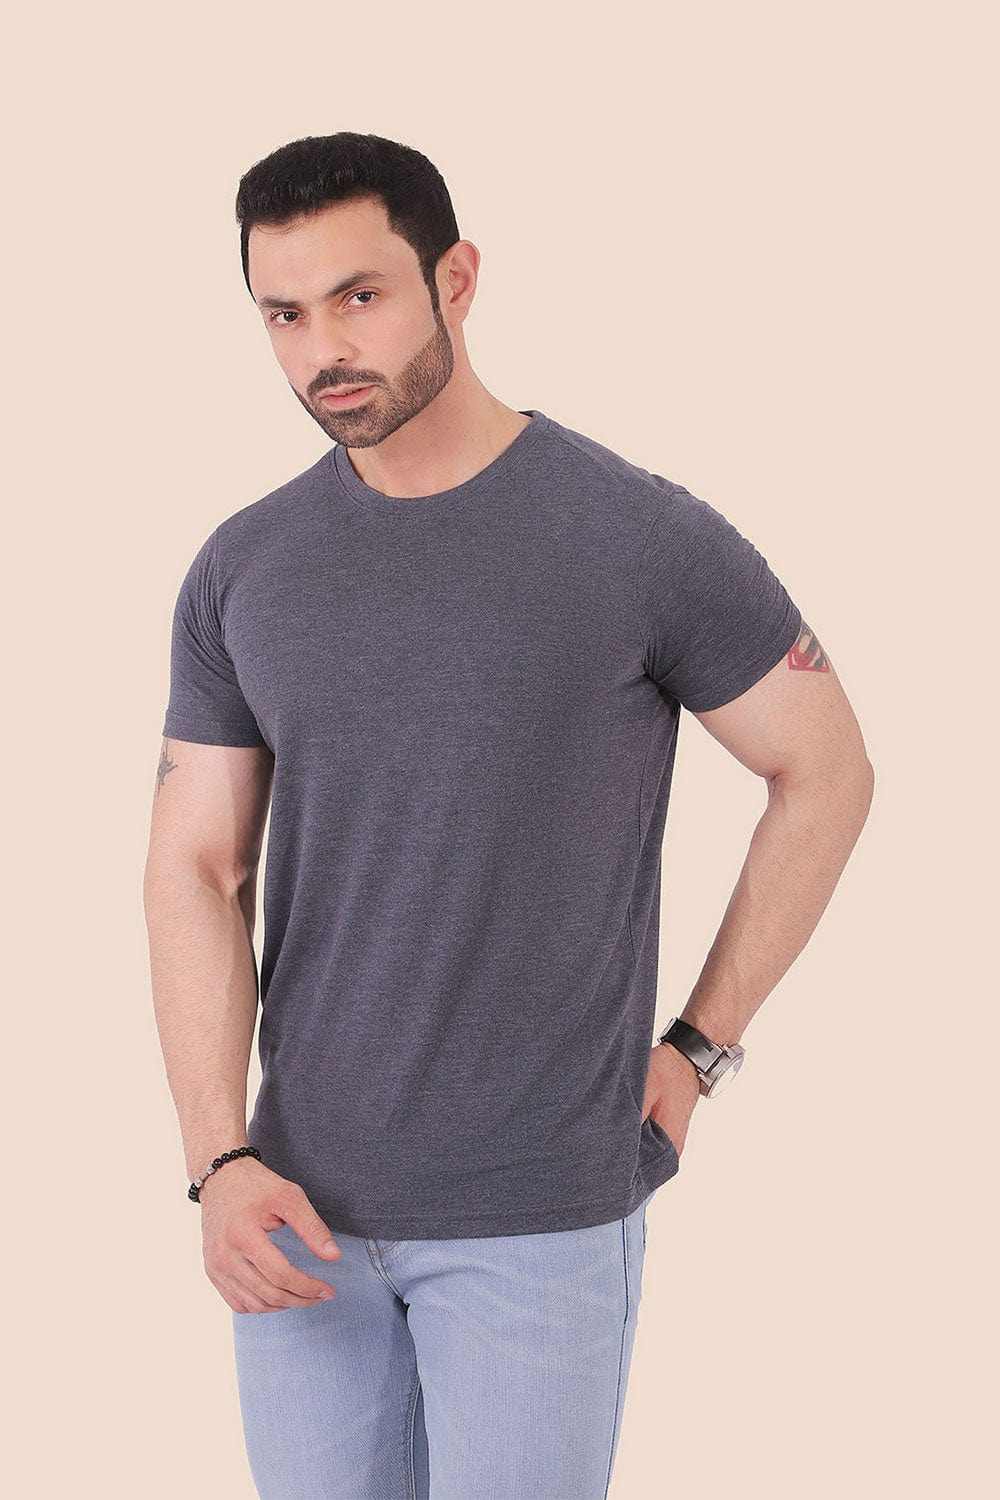 Hope Not Out by Shahid Afridi Men T-Shirt Grey Lounge Wear Tee